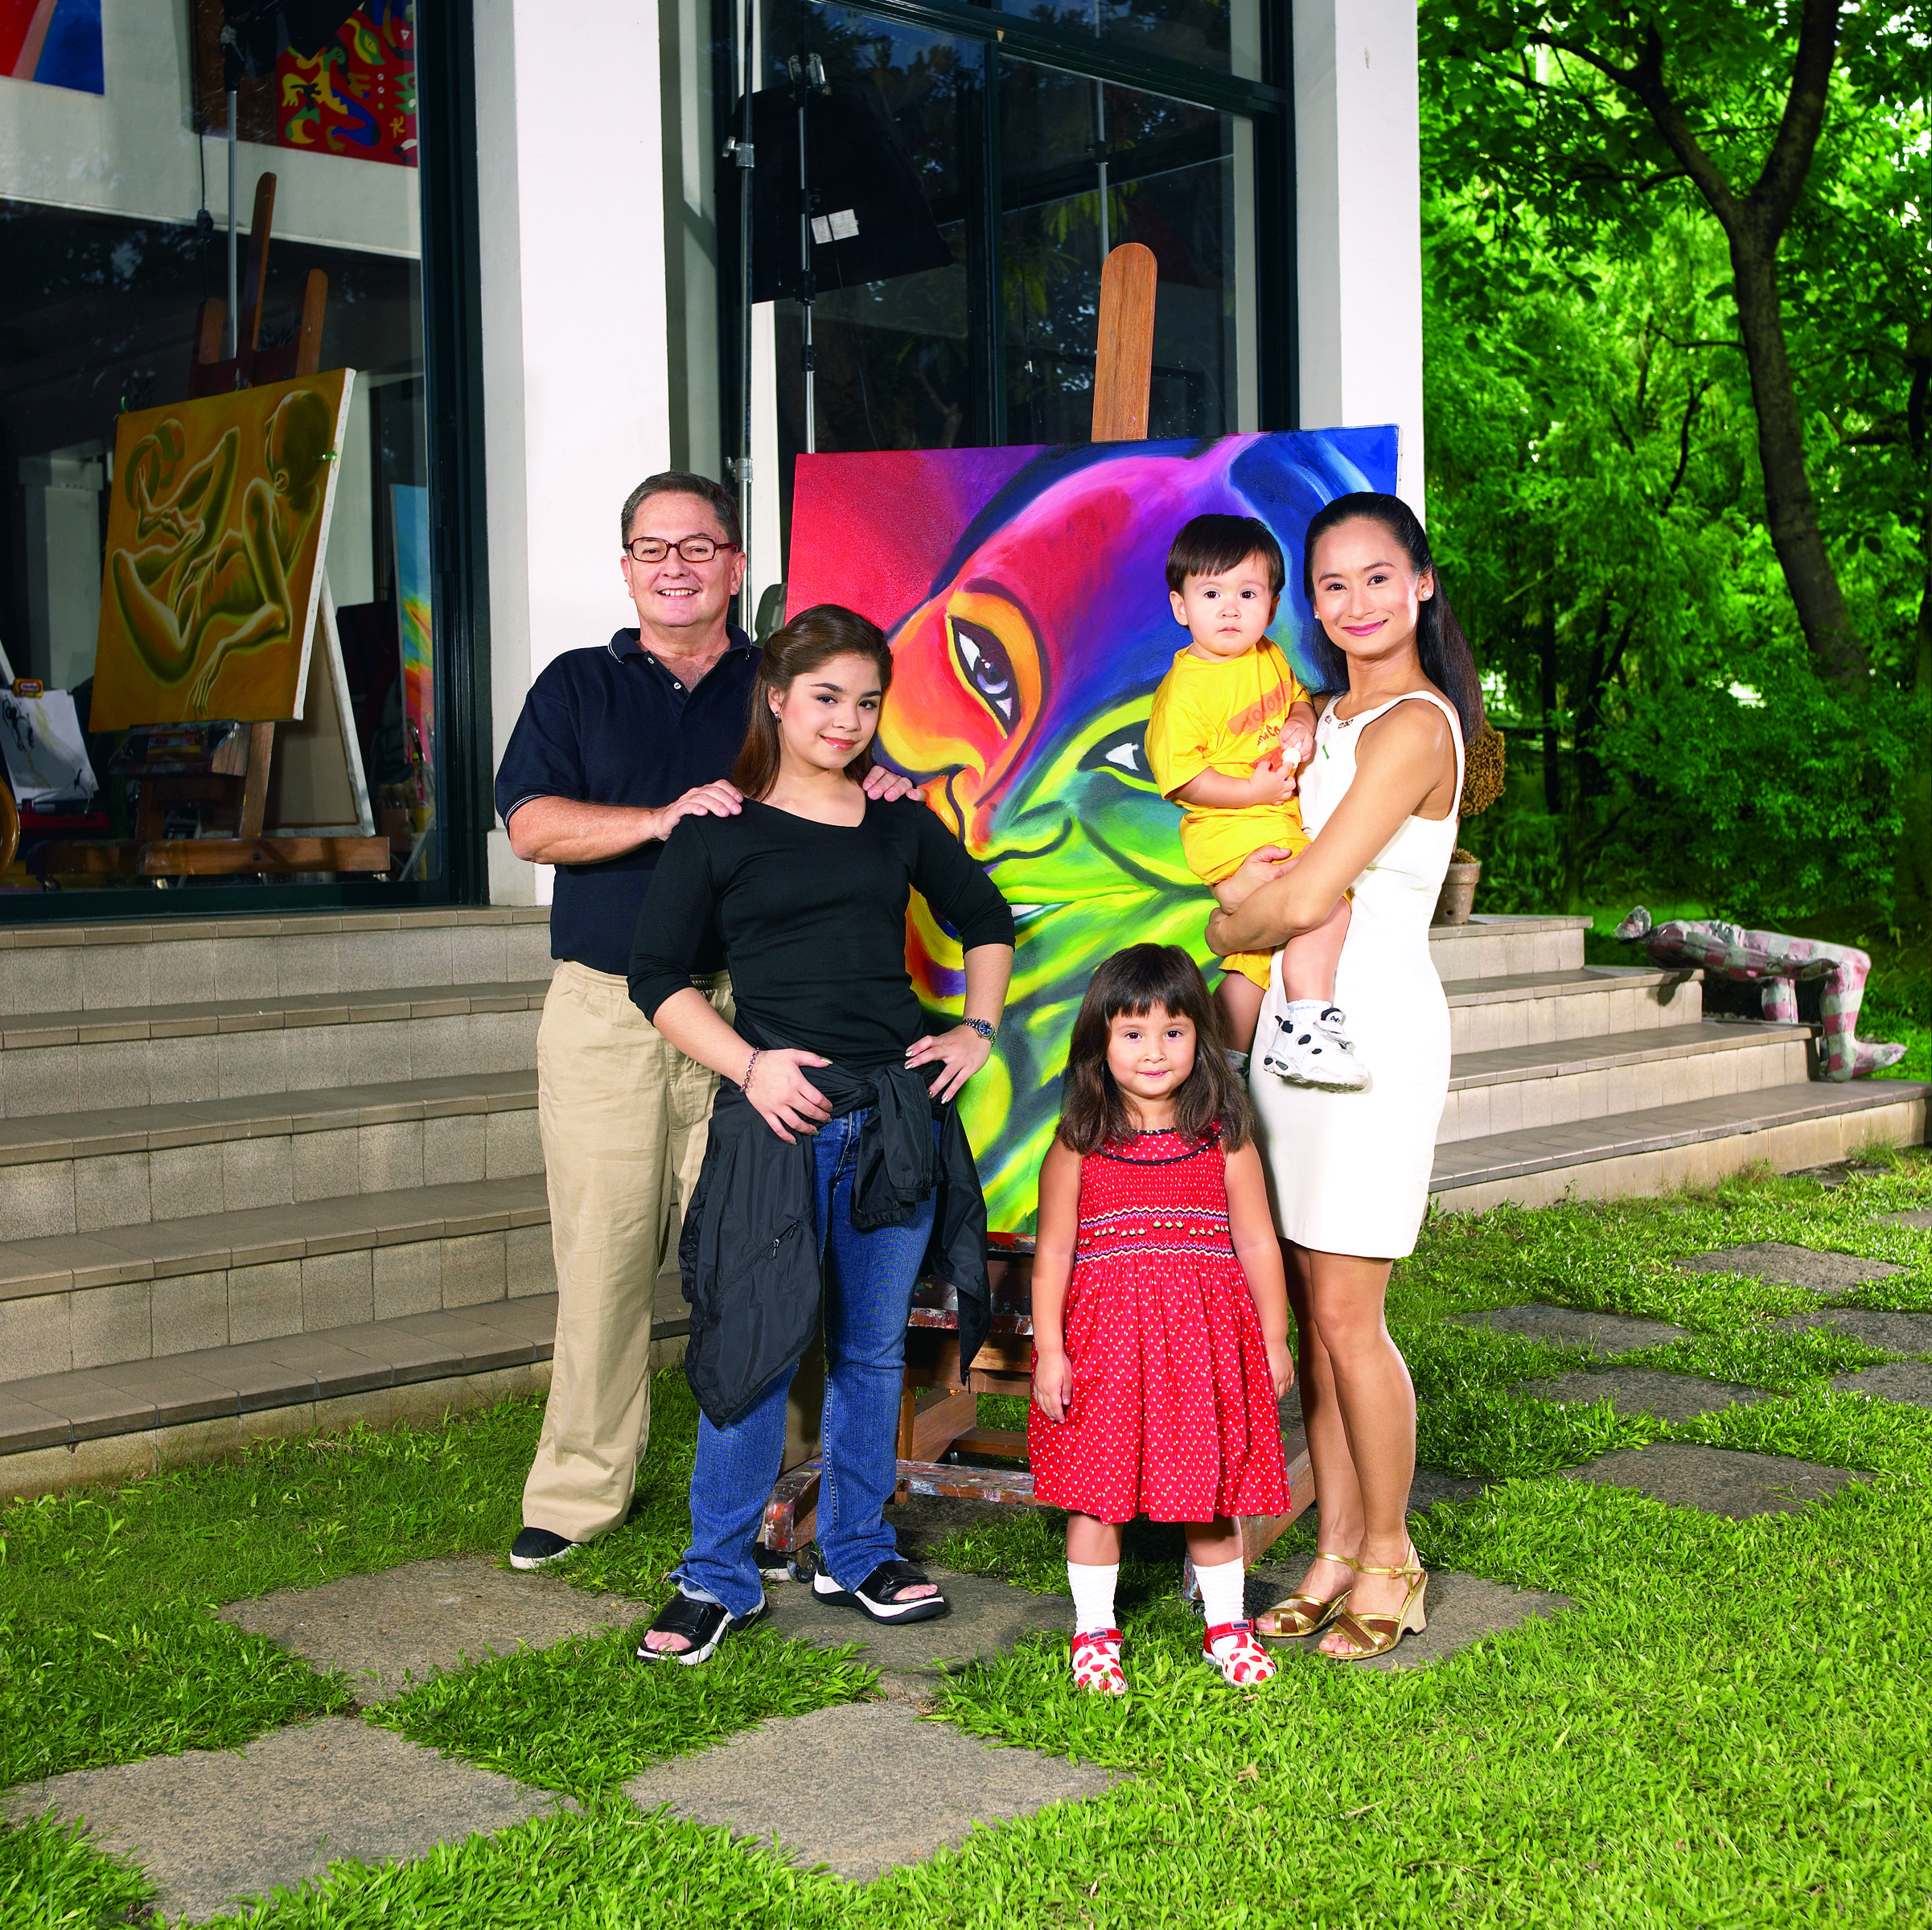  Fred has painted many works depicting Lisa, including the one shown in this family photo taken in 2002. With the couple are their children Sasha, Missy and Manuel. 